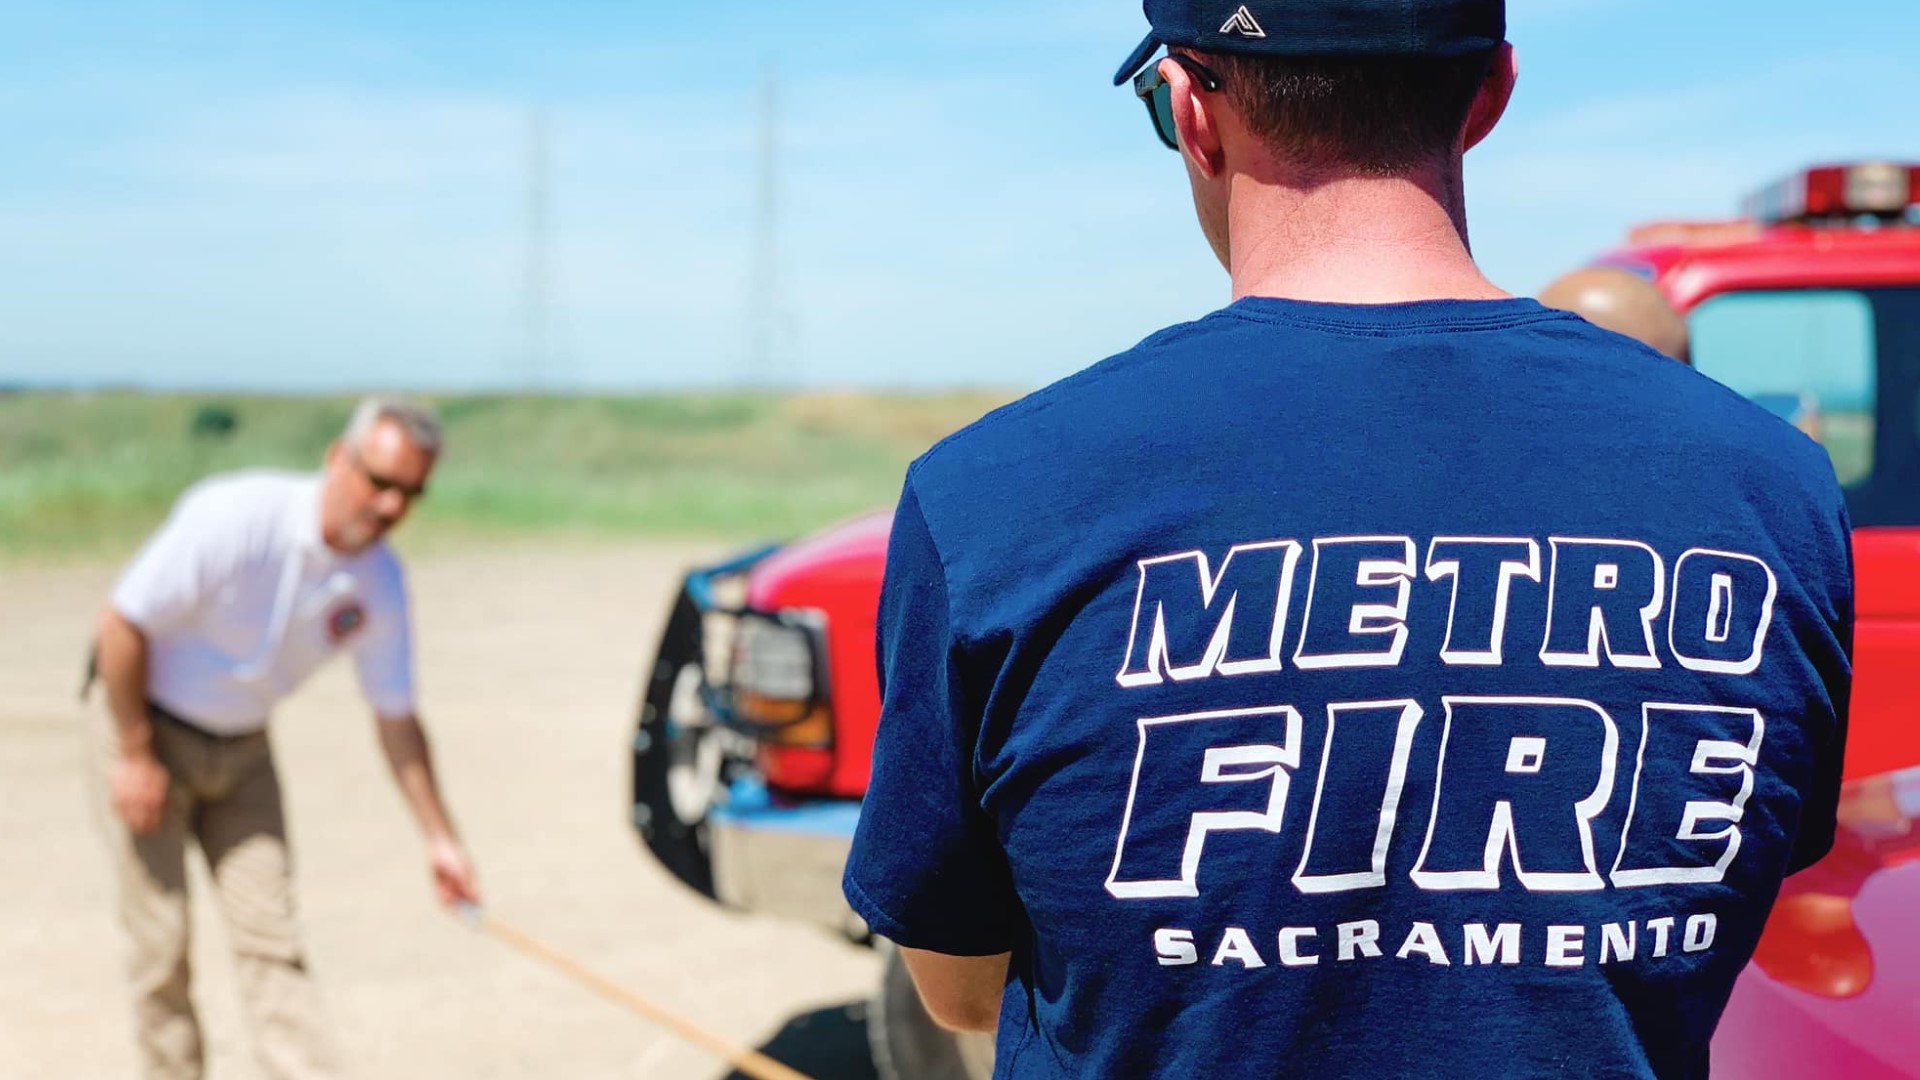 For the next two months, Sac Metro firefighters will be going through a course in Rancho Cordova to learn or have a refresher to drive off-road. The course is in the Prairie City State Vehicular Recreation Area. It's something they will often have to deal with during fire season.